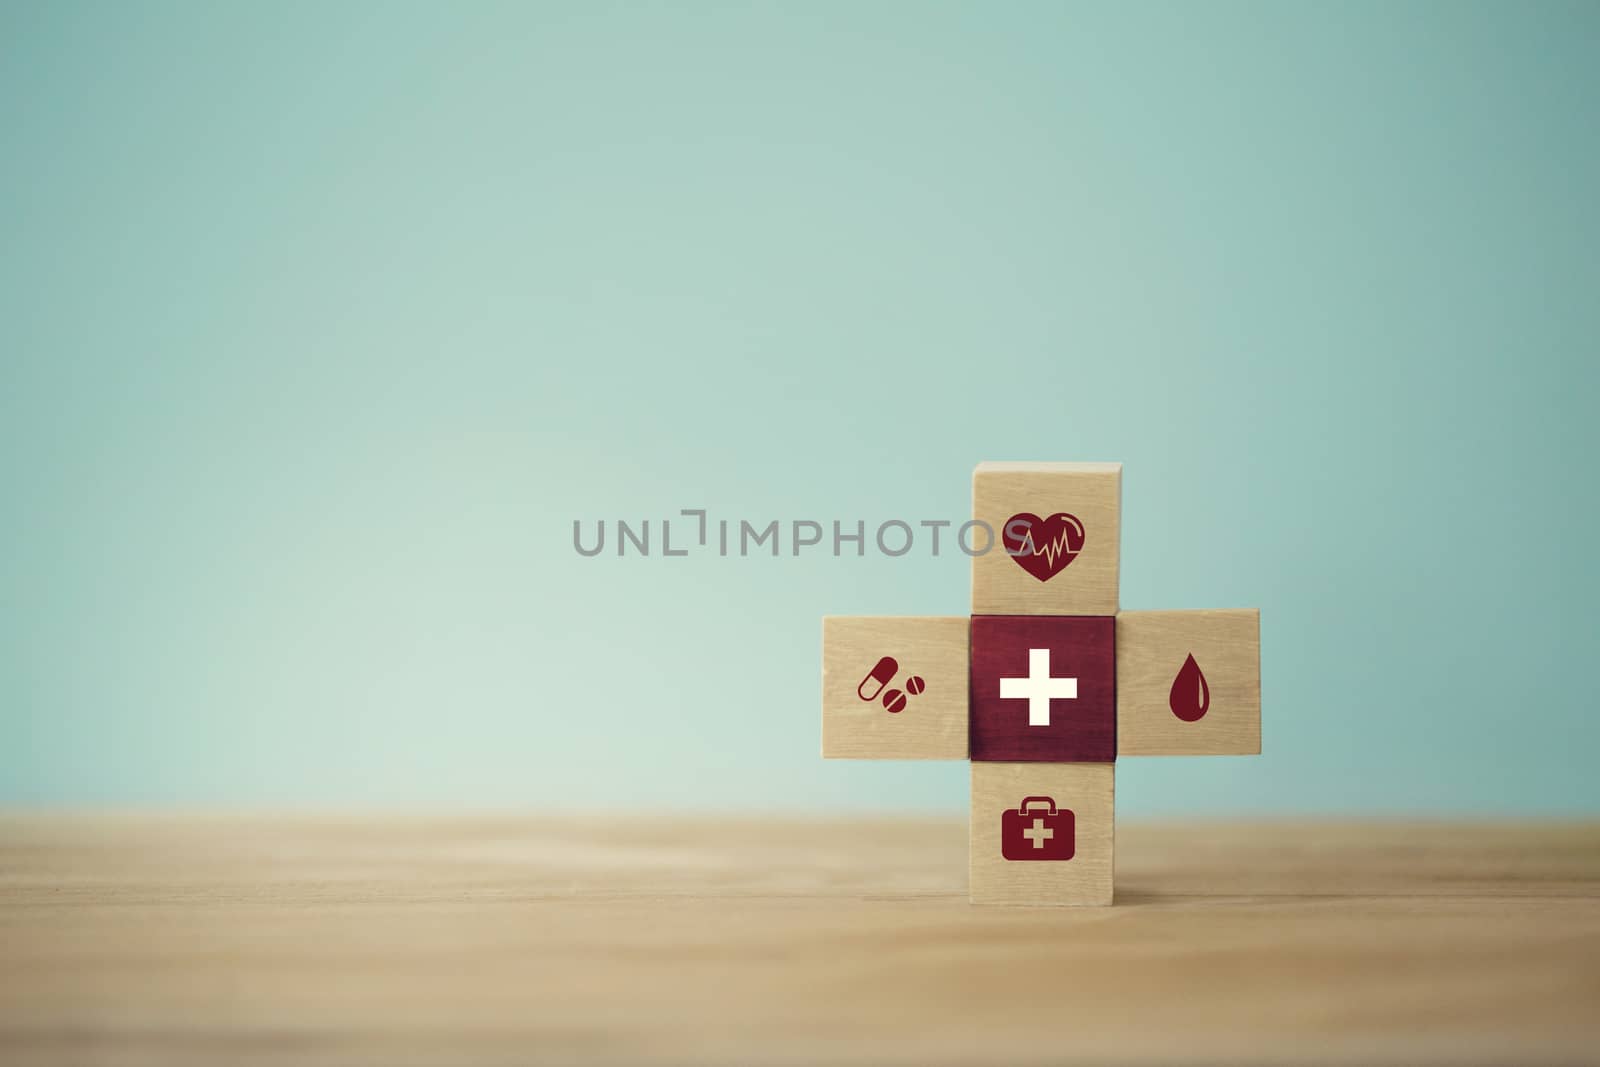 Healthcare concept about of health and medical insurance, arranging wood block stacking with icon healthcare medical on table wooden background.